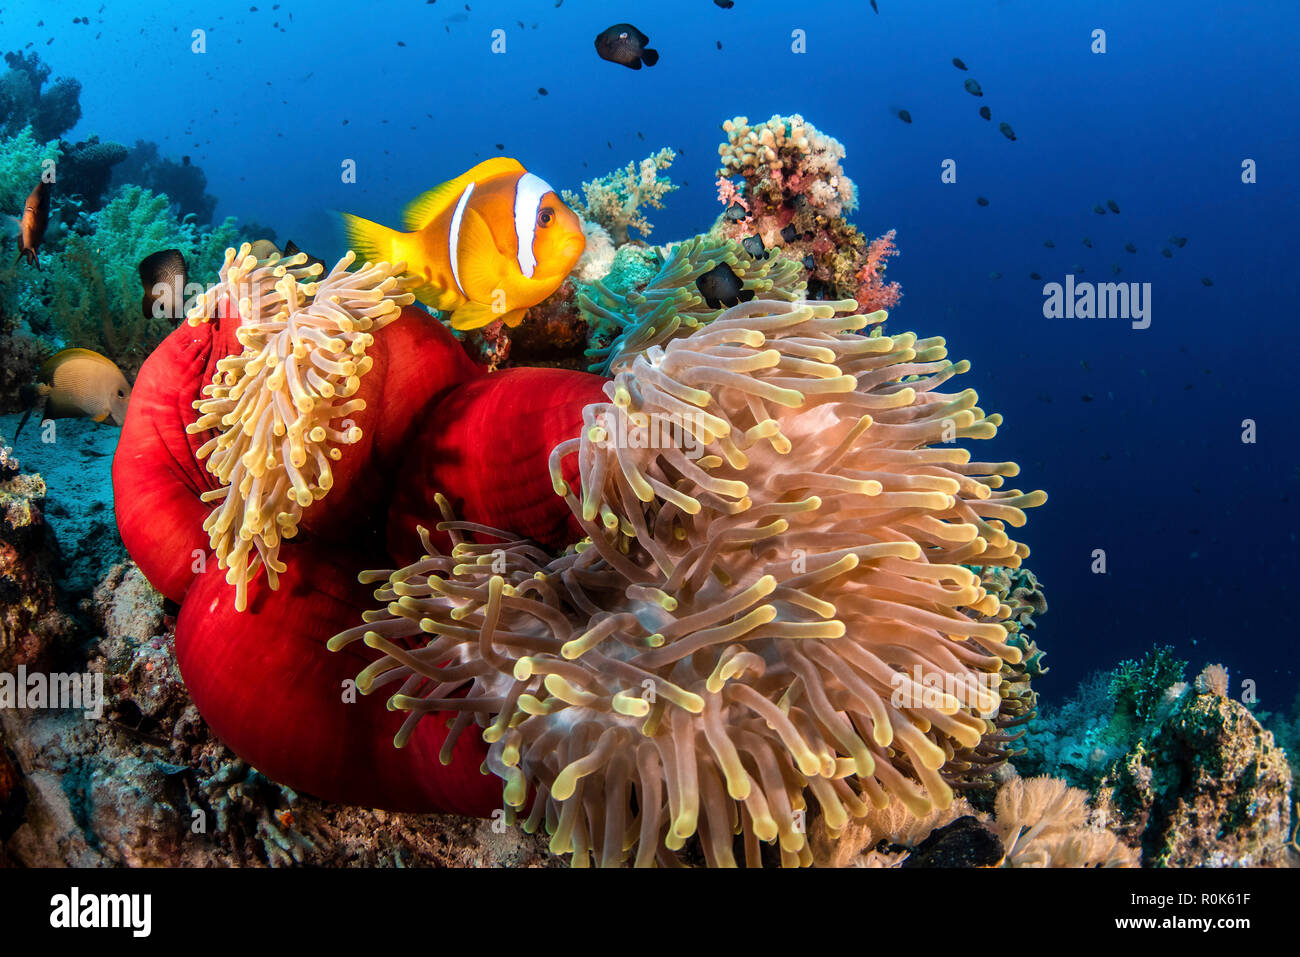 An anemone fish outside a closed anemone. Stock Photo